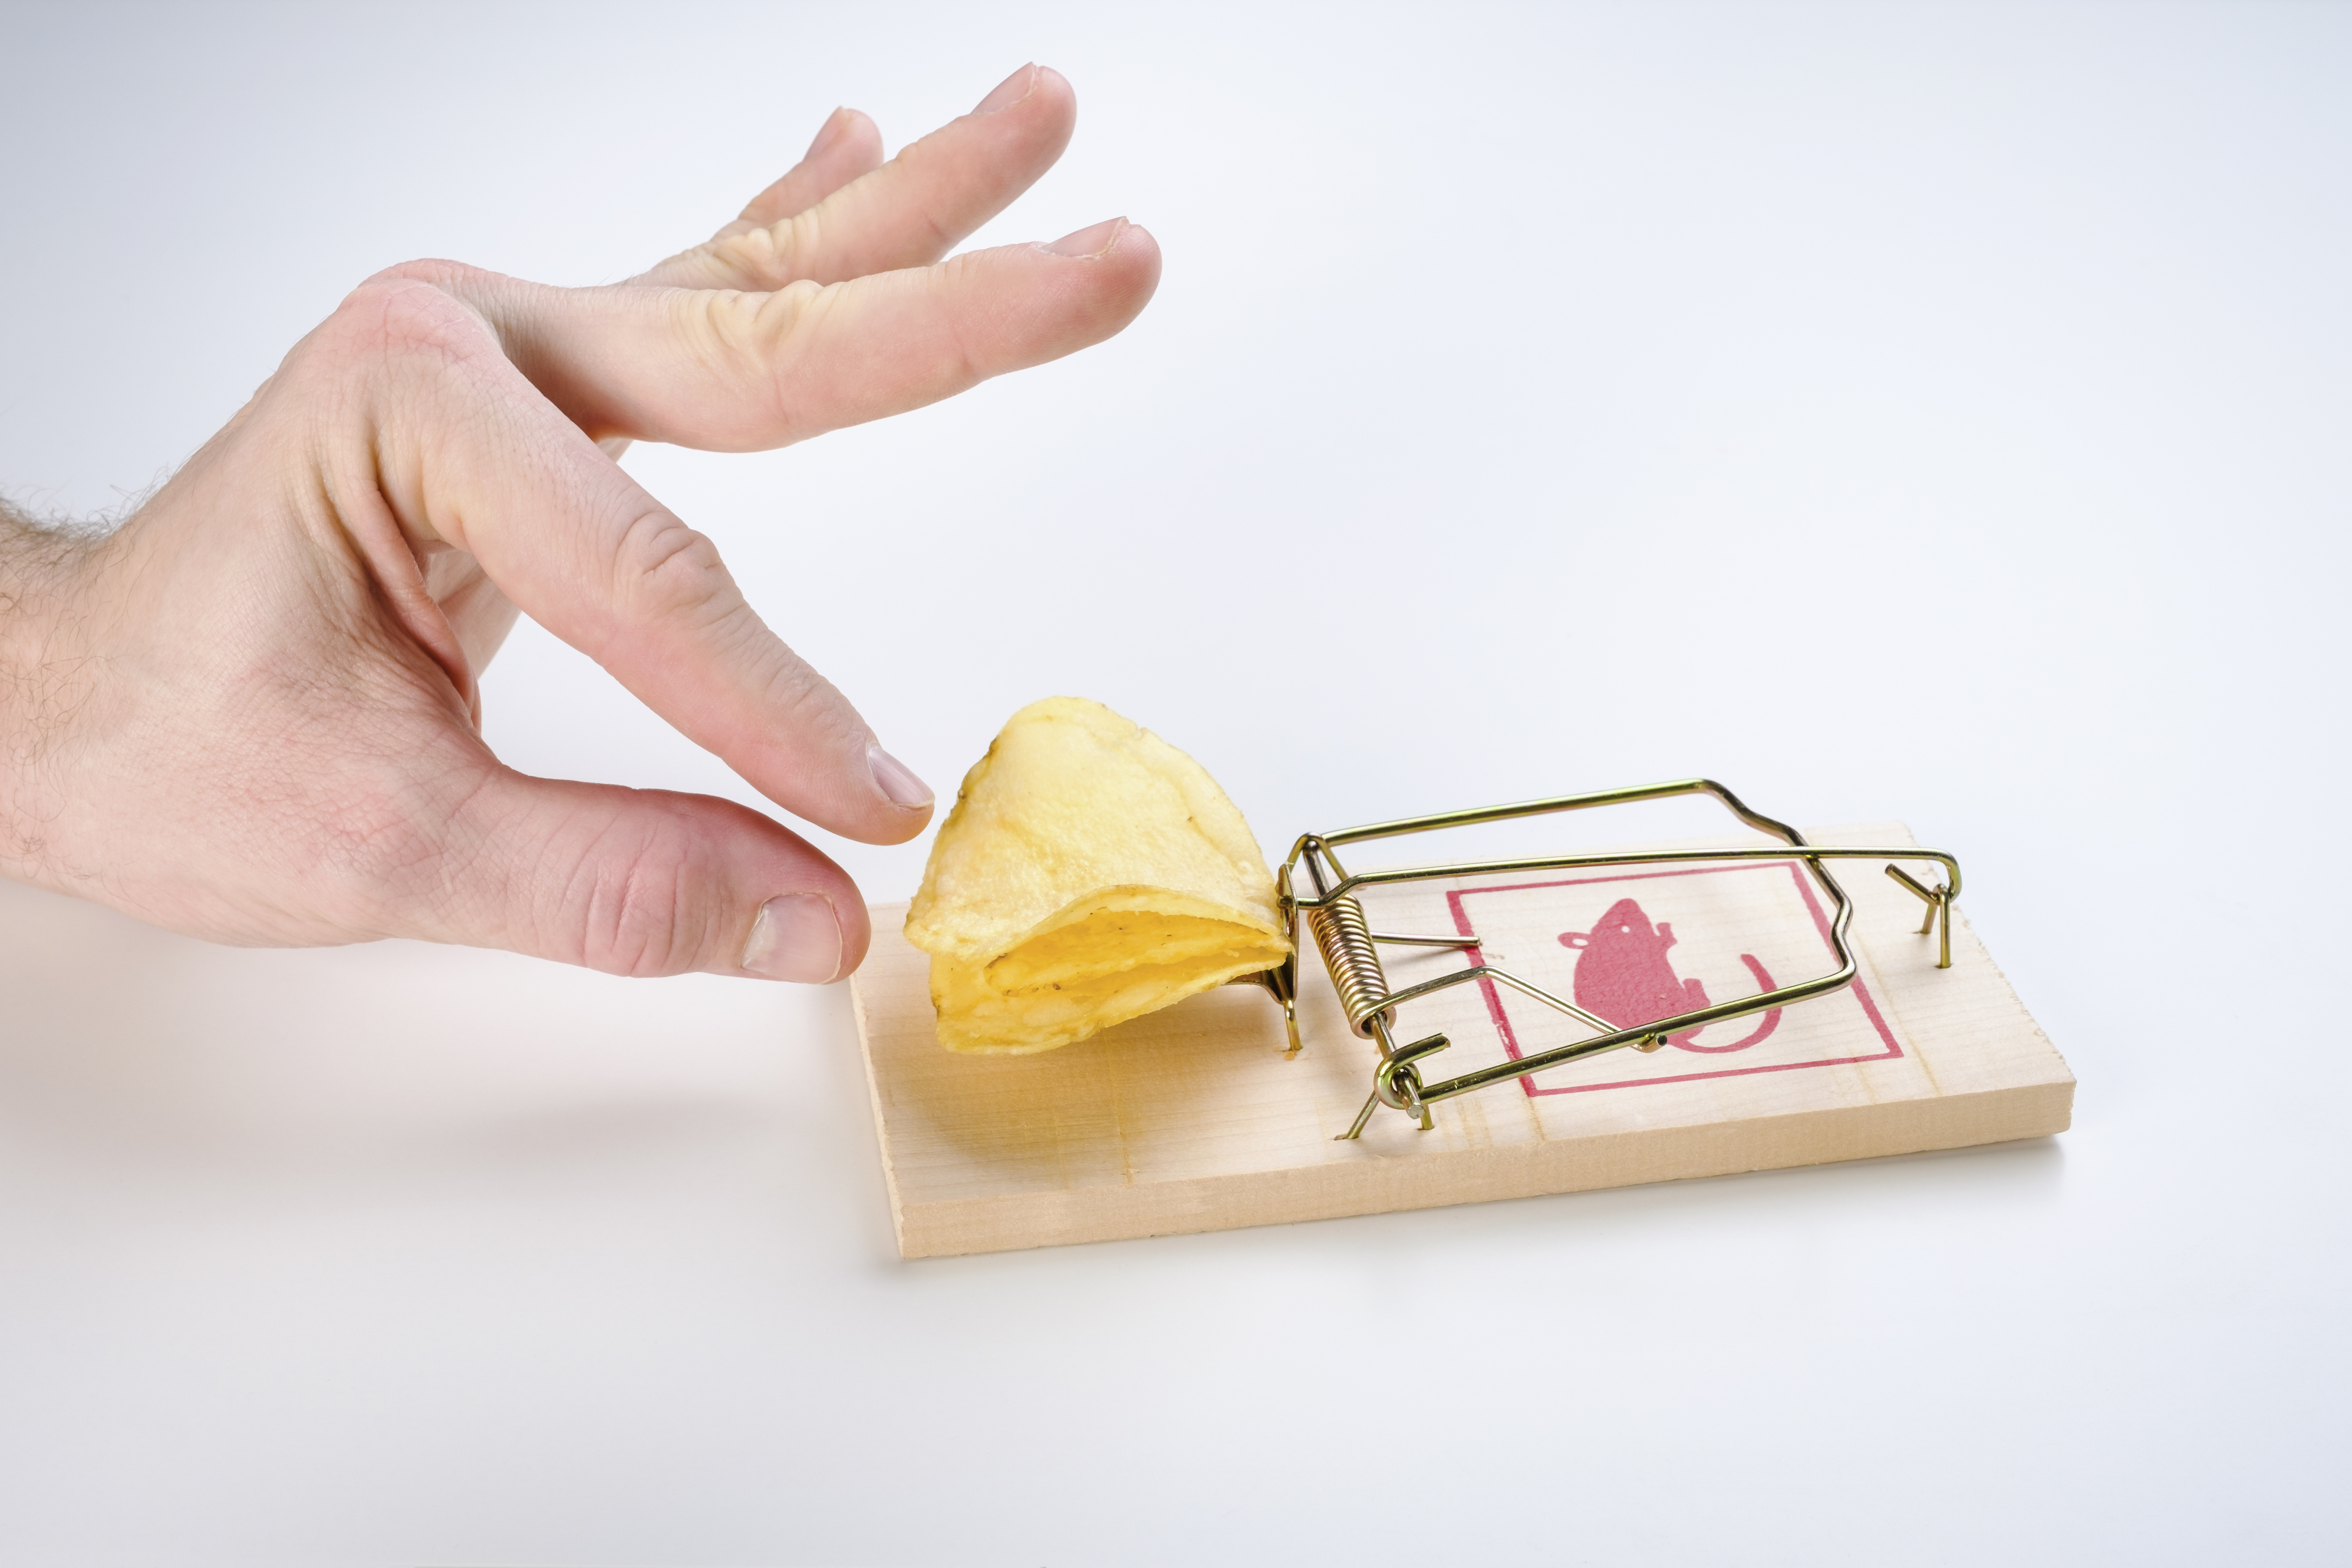 A hand reaching for a potato chip that's baiting a mousetrap.